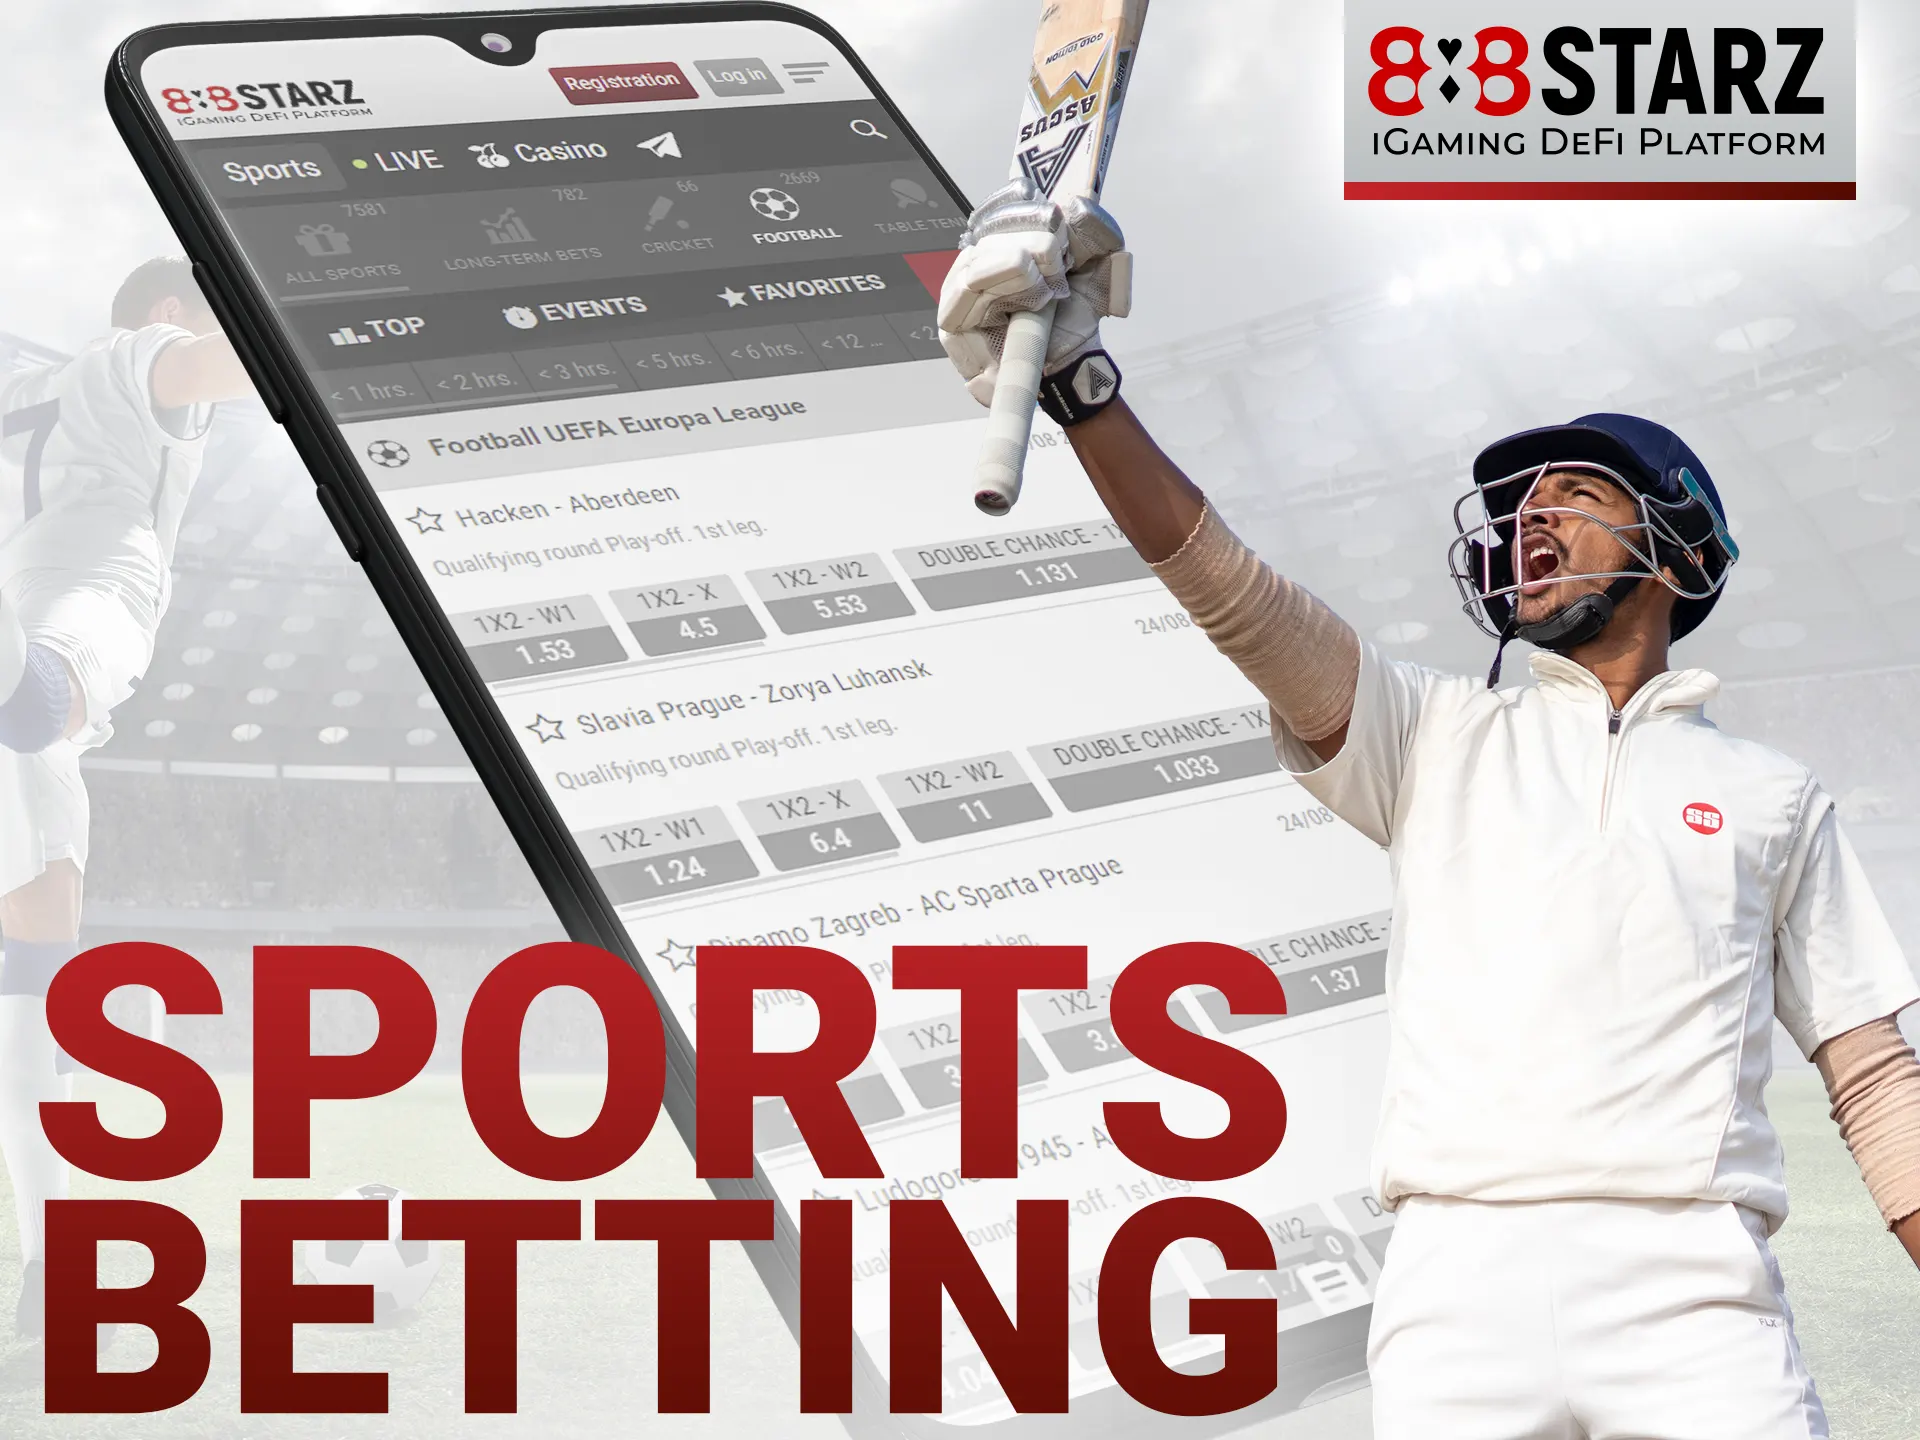 Bet on sports on the 888Starz mobile app.